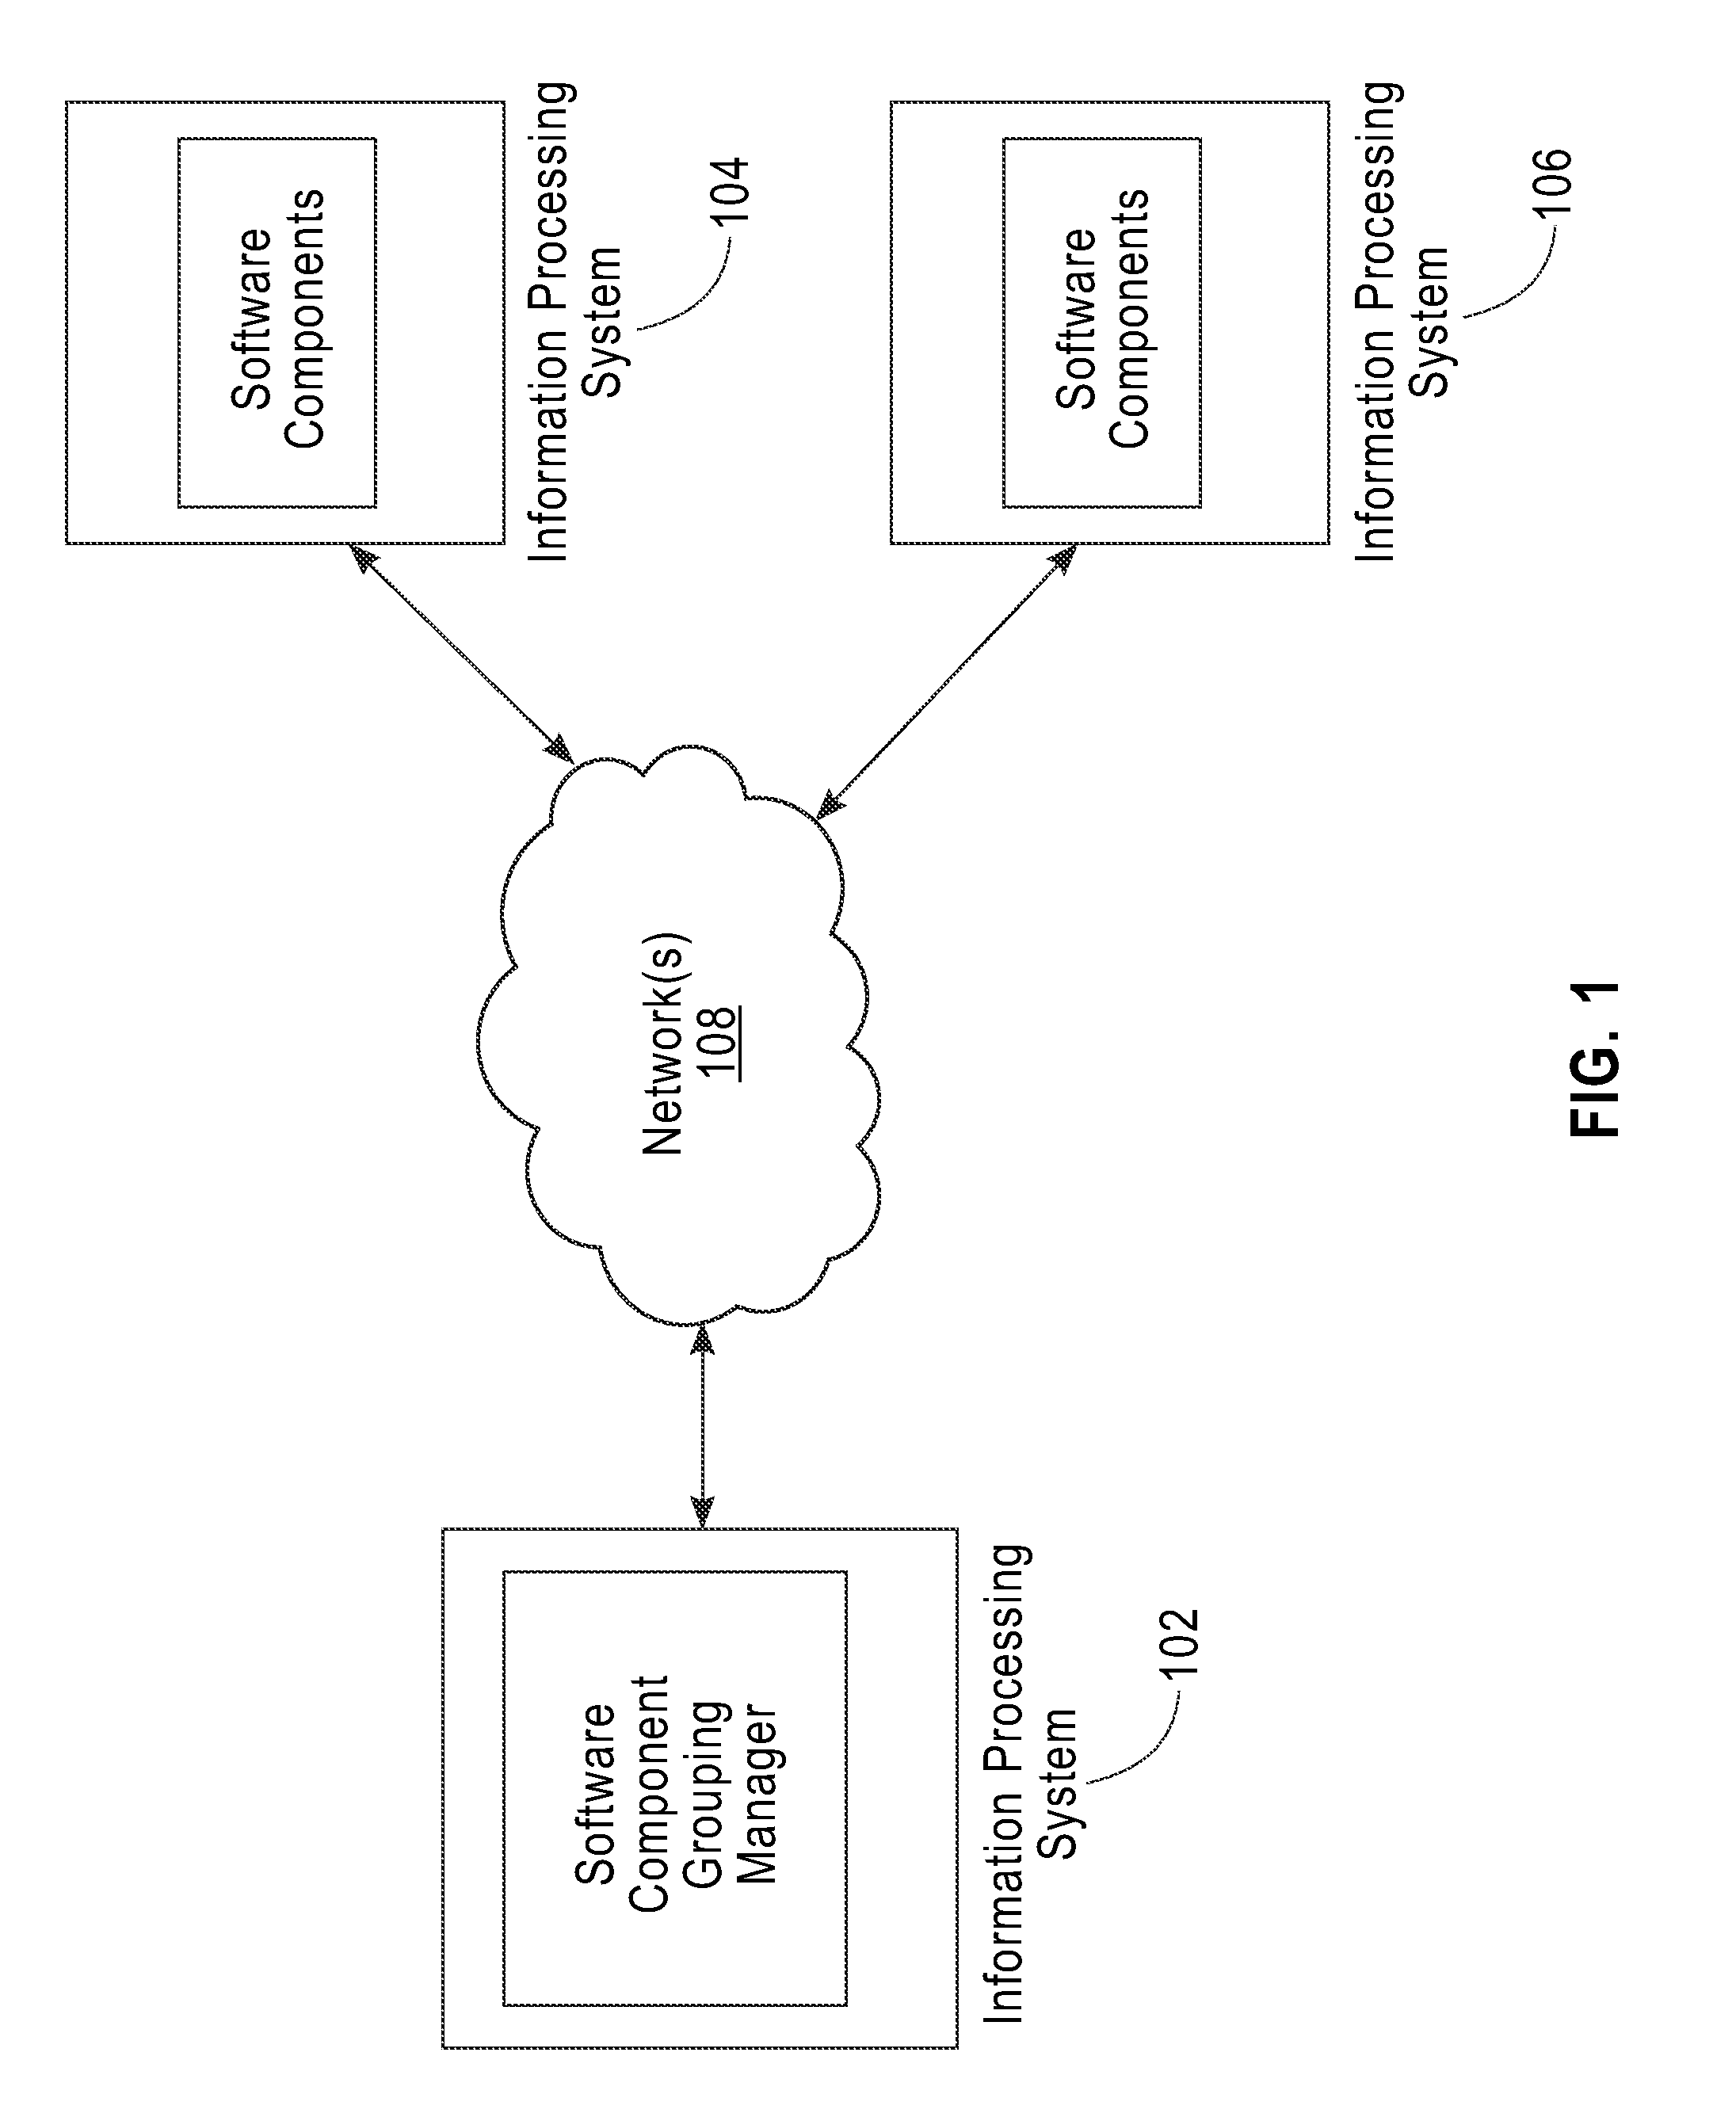 Method and system for selecting software components based on a degree of coherence